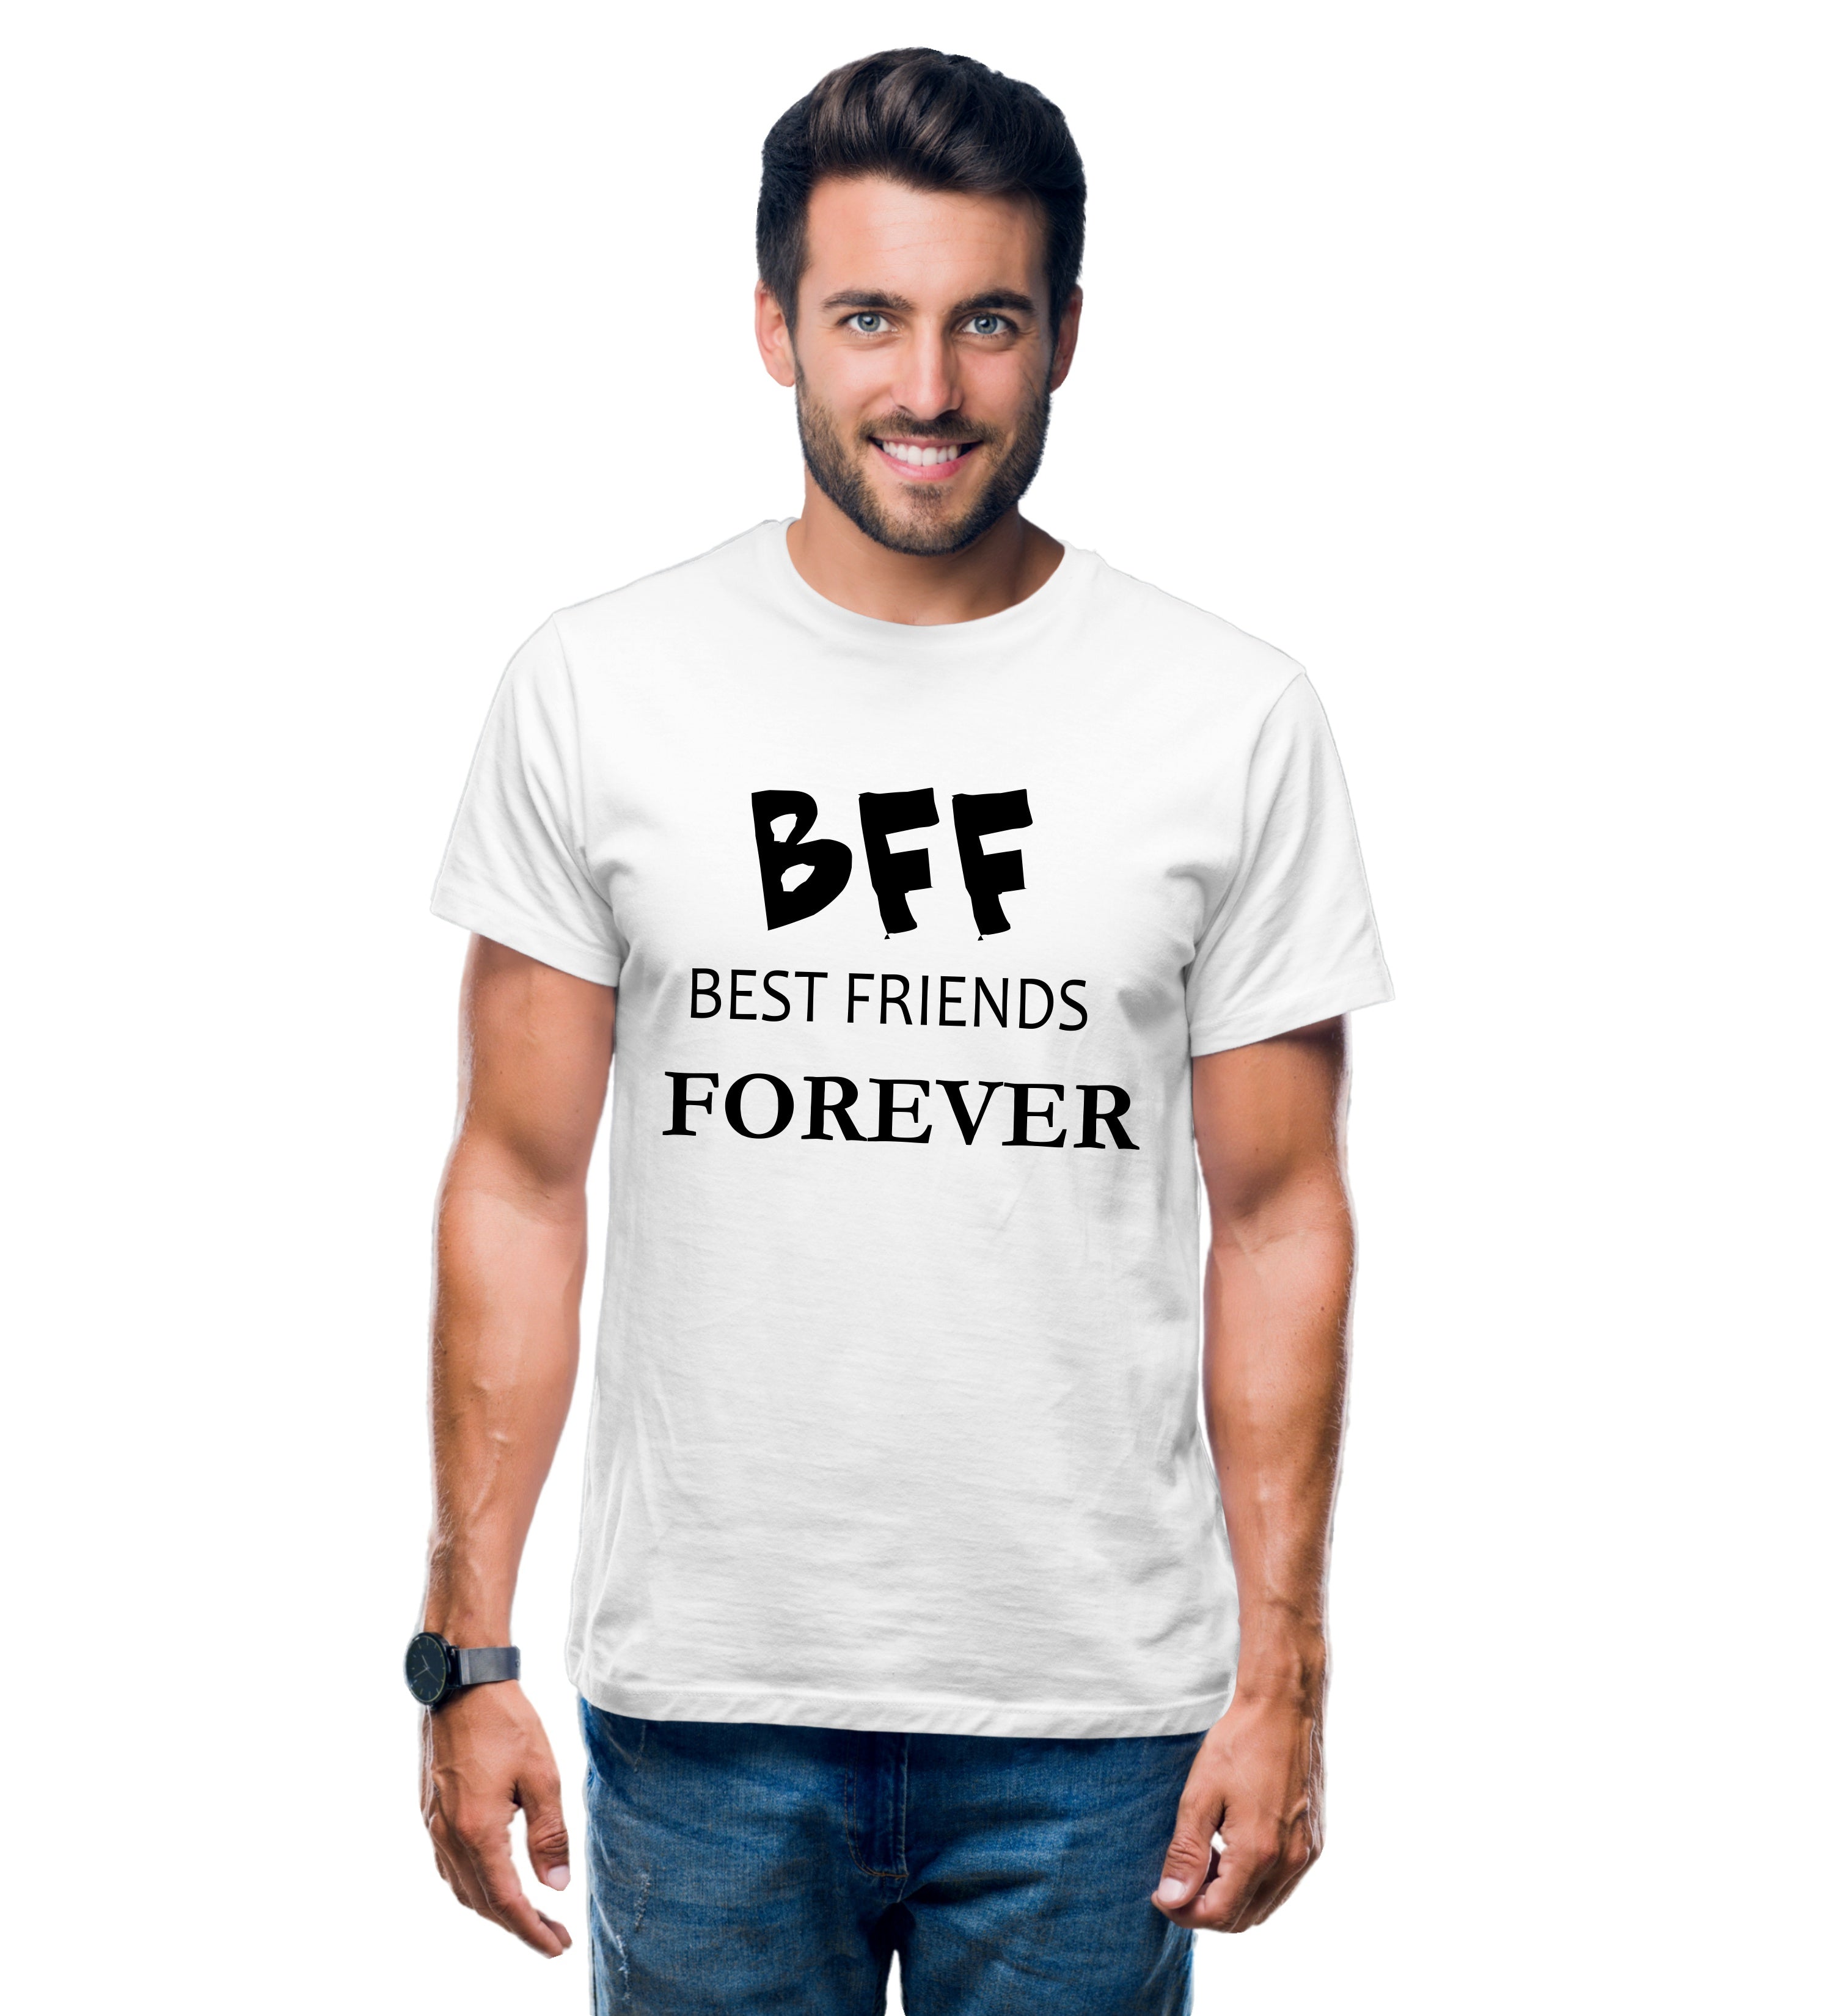 Printed Graphic T Shirt For Men In White Colour - BFF Best Friends Forever Variant